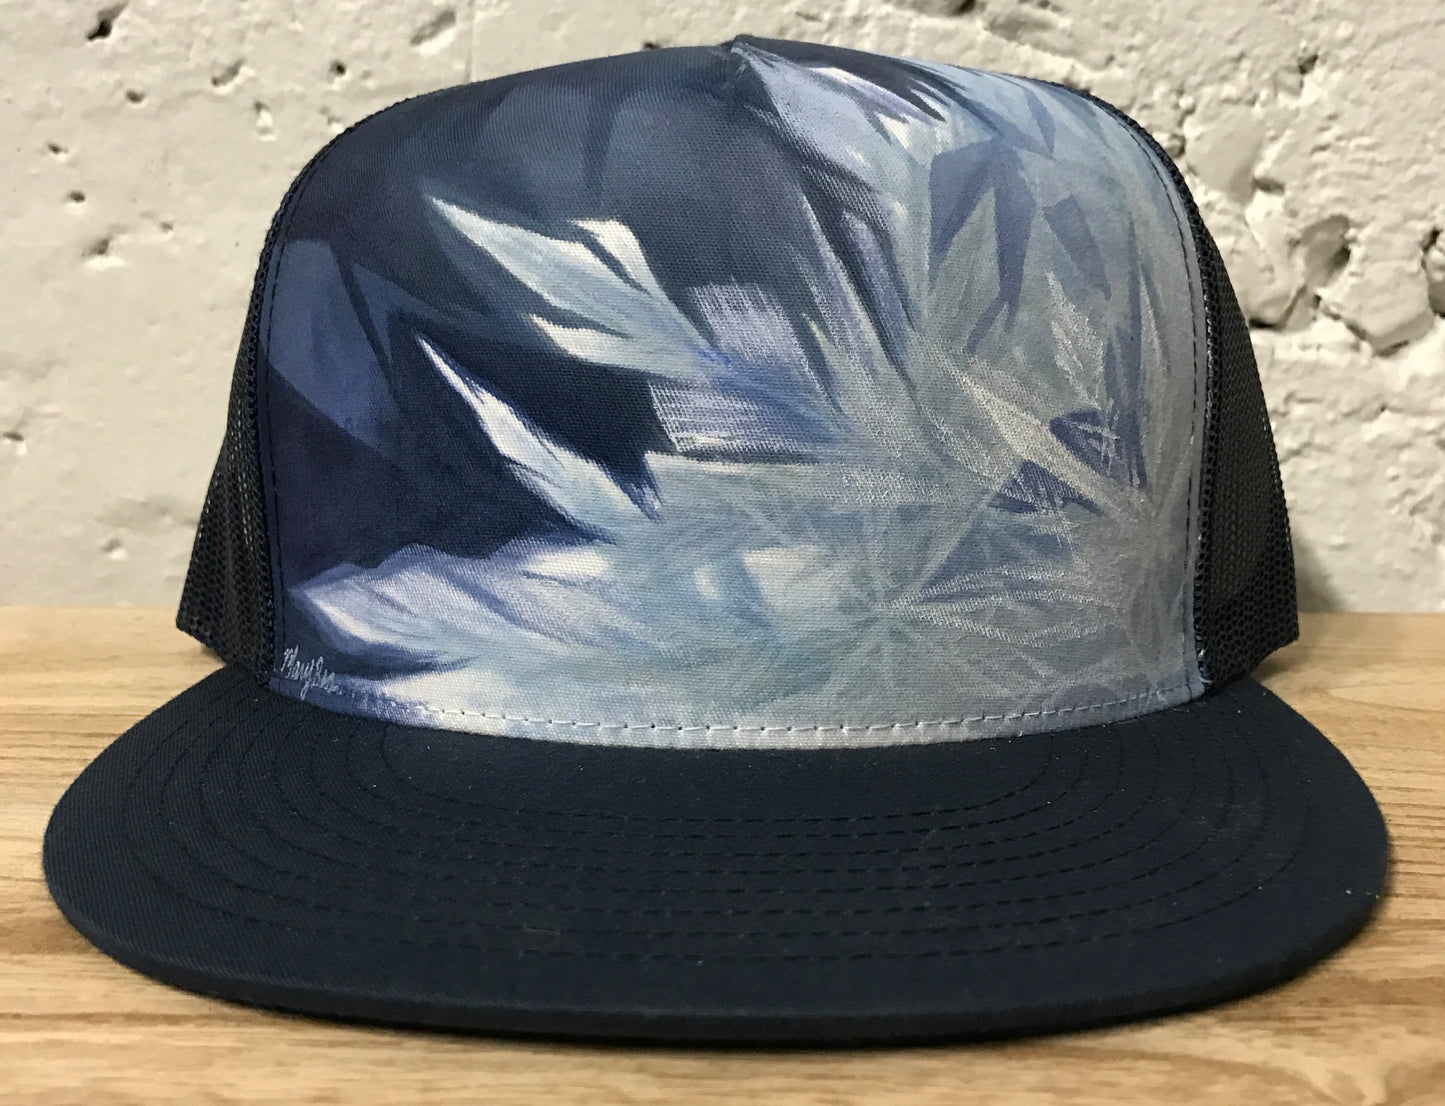 "Snow Crystals" Hand Painted on Navy Snapback Trucker Hat